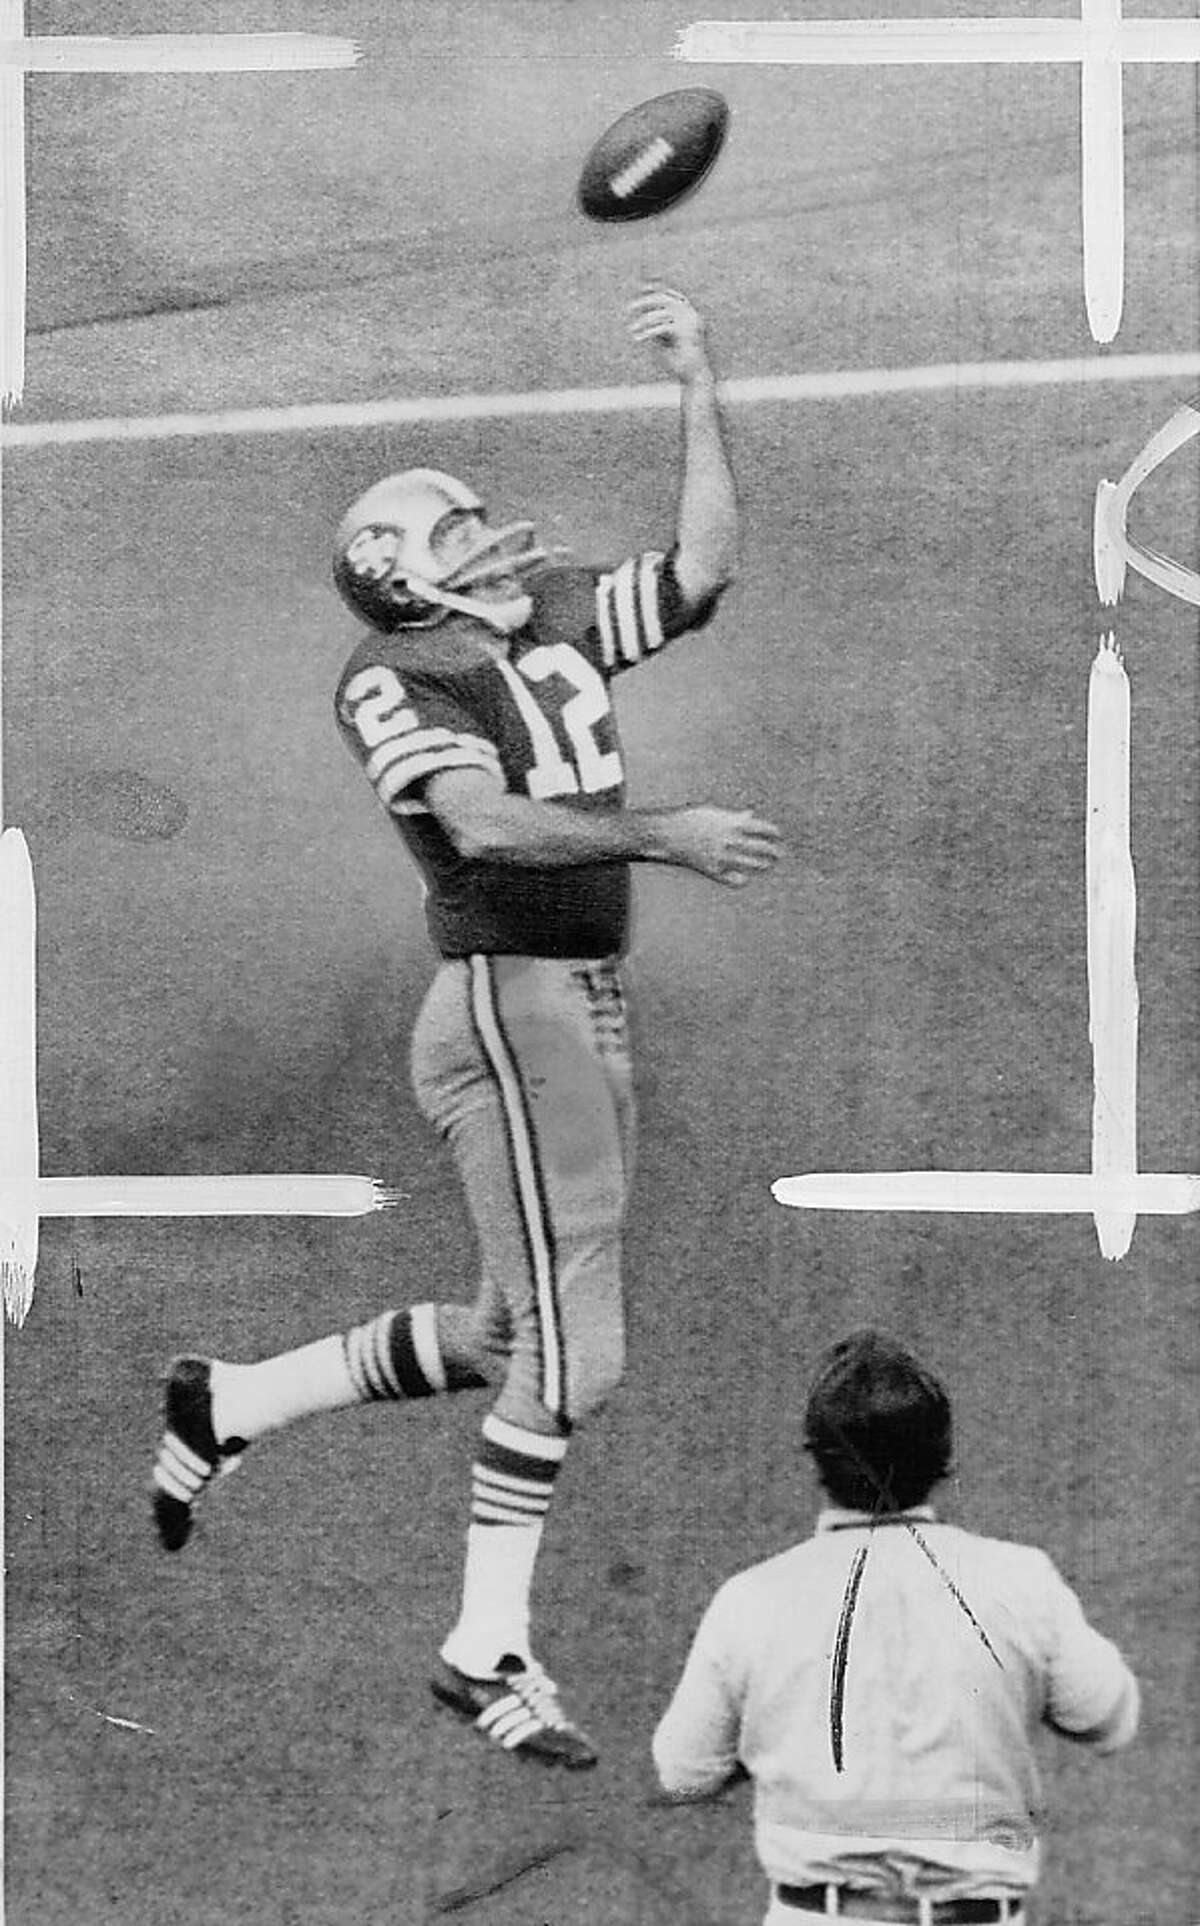 49er QB John Brodie celebrates after scoring the go ahead TD in the 4th quarter of San Francisco's 31-27 defeat of the Lions at Candlestick Park. Photo was taken December 15, 1973.